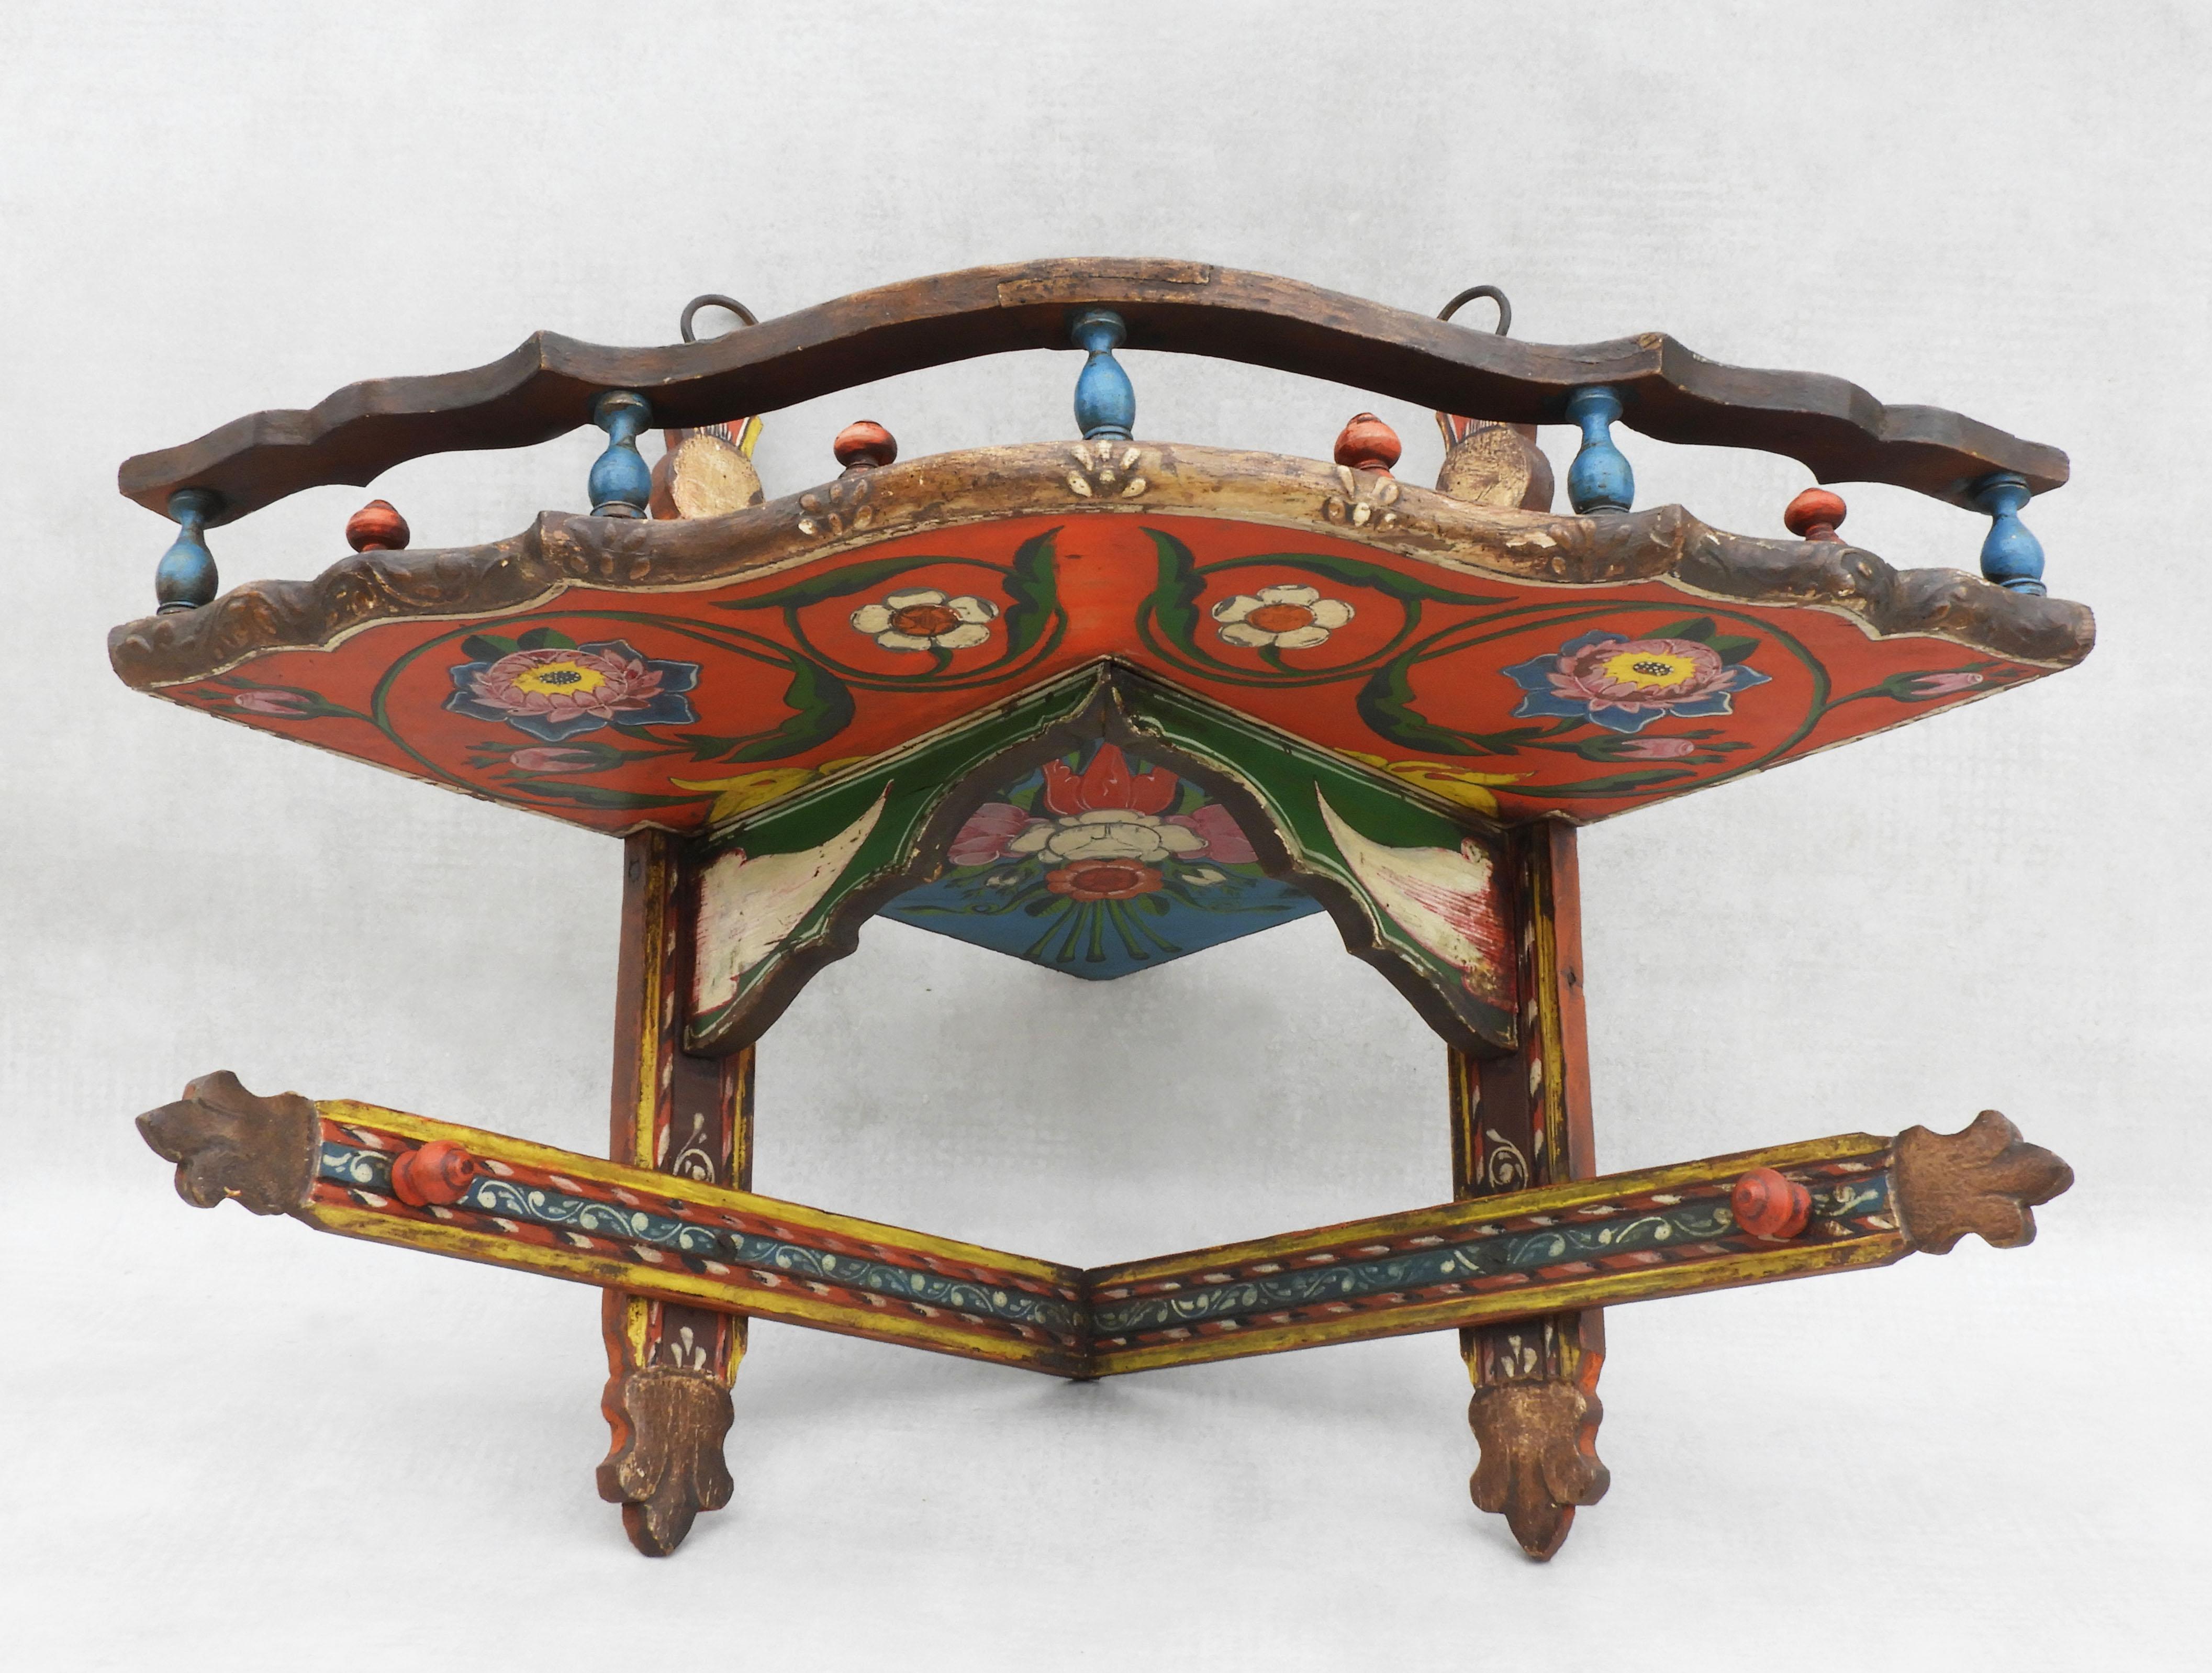 Charming hand-painted Folk Art corner shelf from Eastern Europe c1900.
A decorative display piece in a vibrant colourful floral theme with a galleried niche shelf. Wear consistent with age and use, lghtly distressed but in overall good condition.